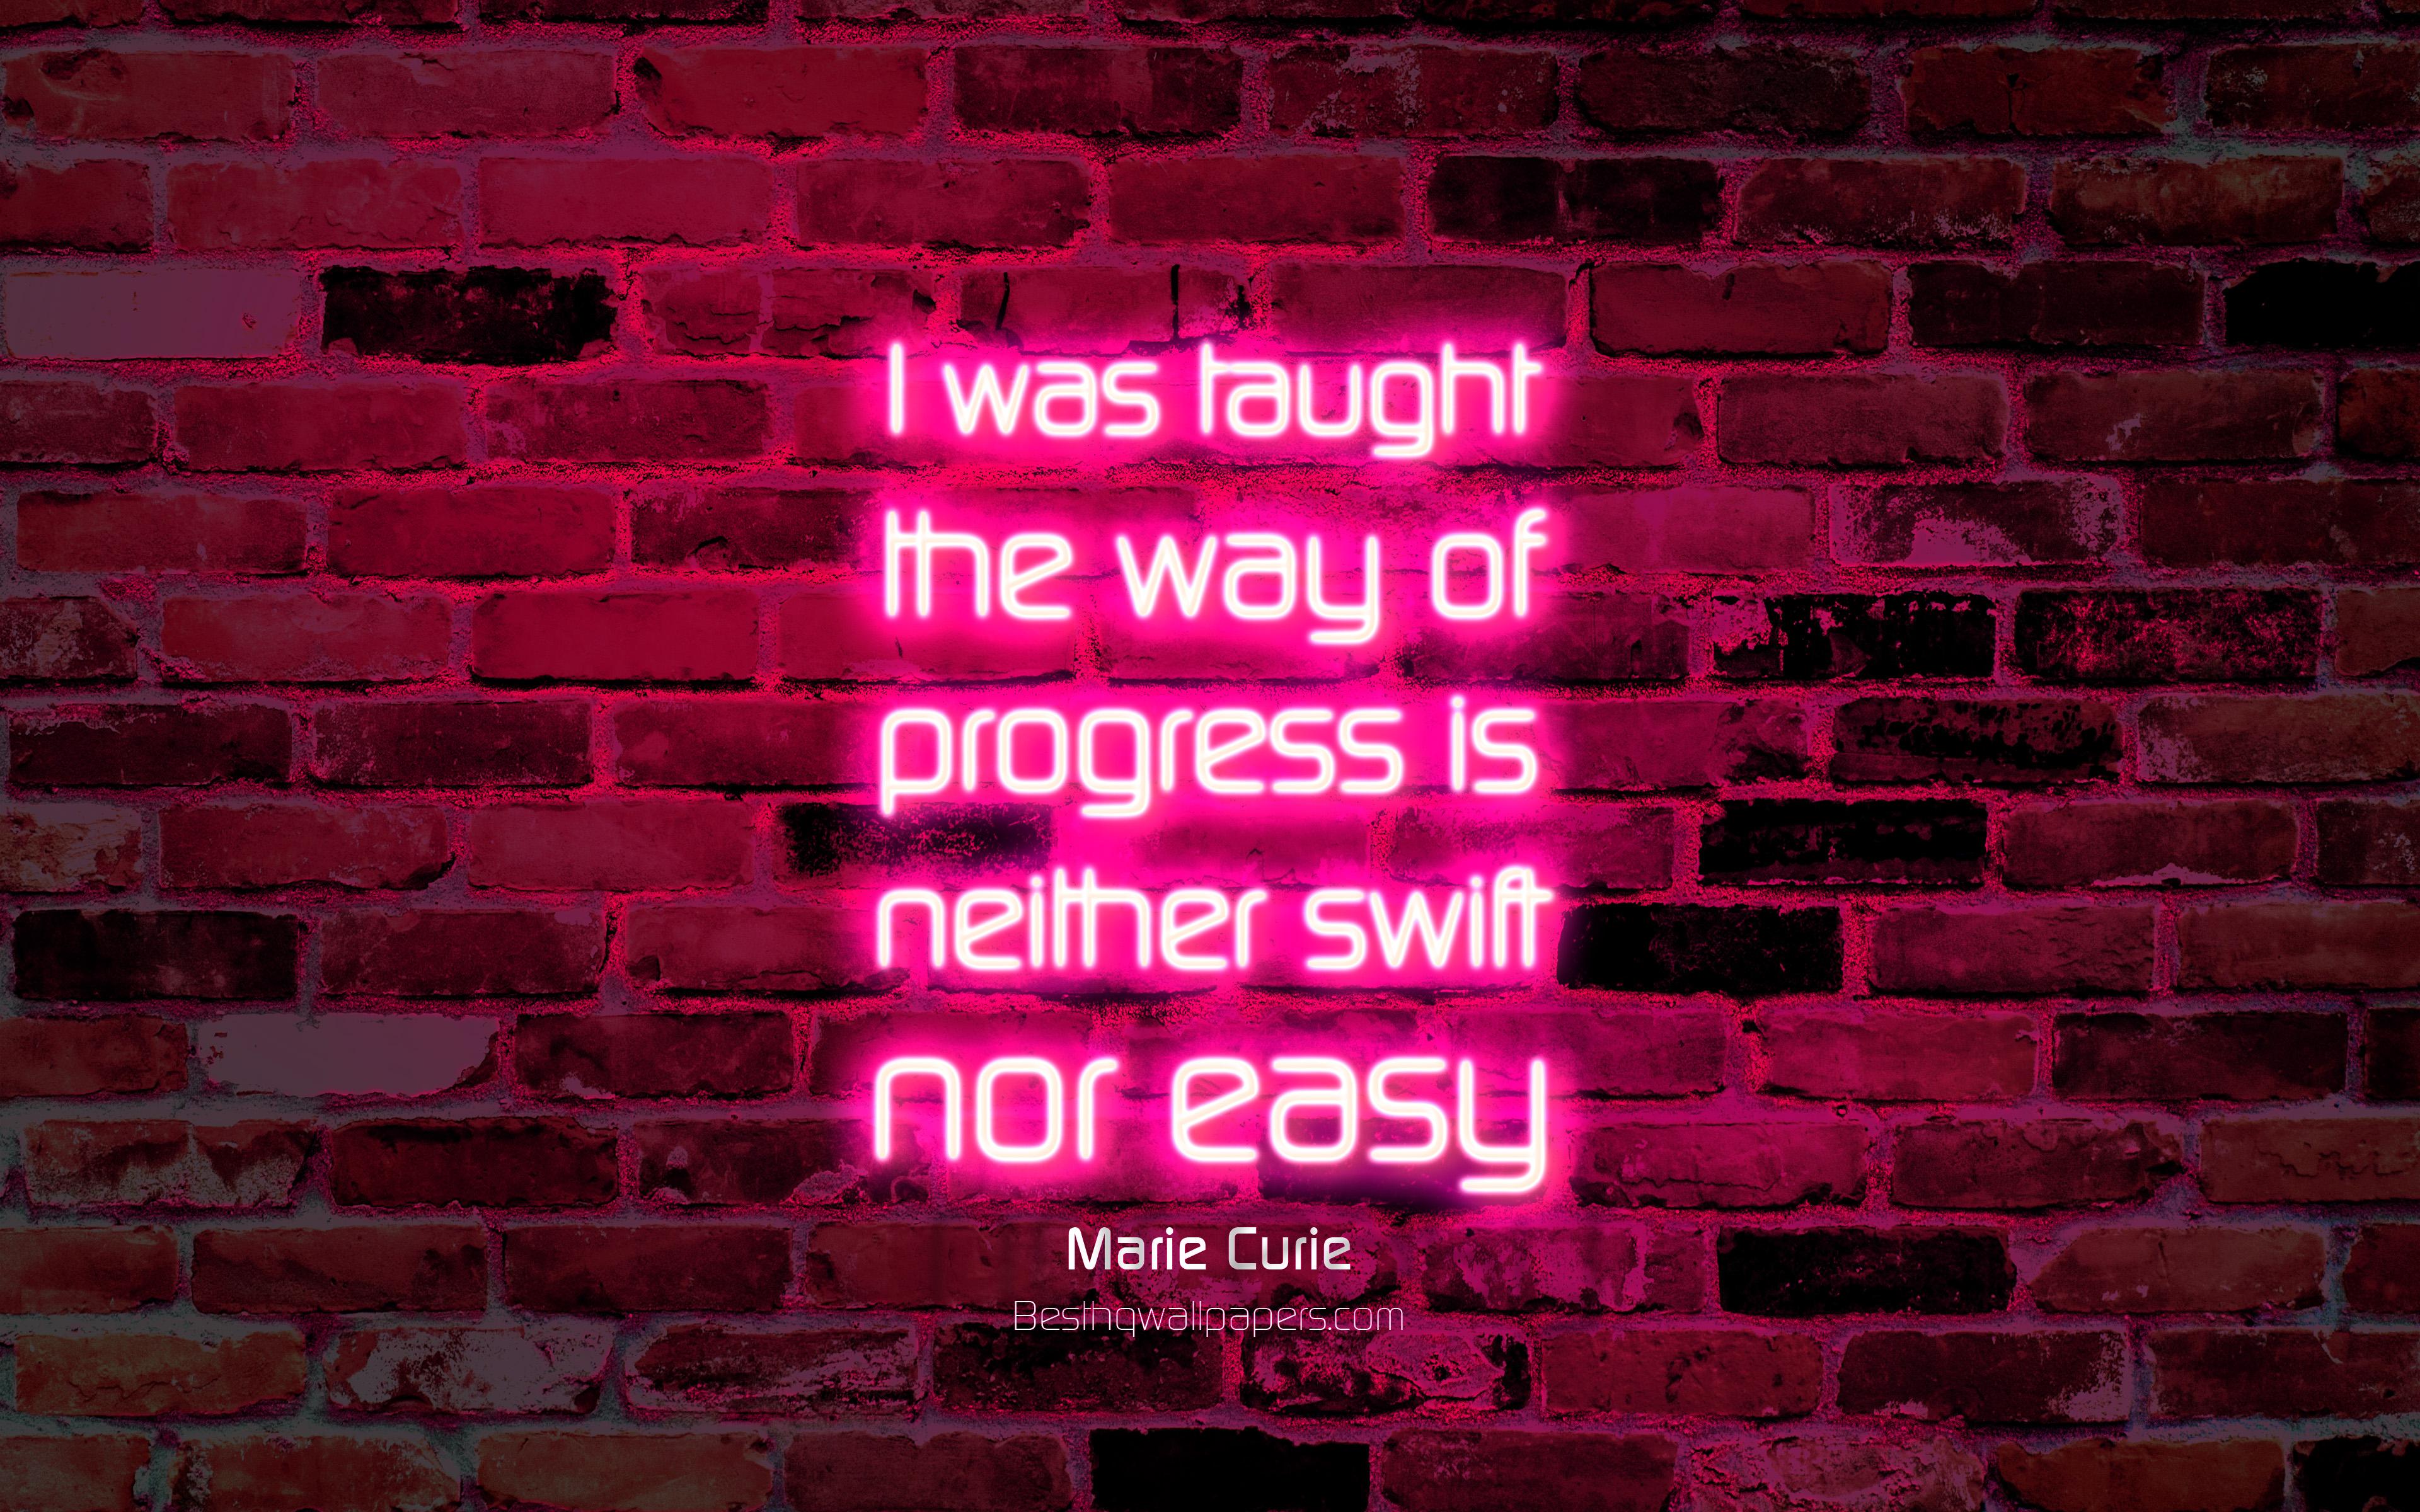 Download wallpaper I was taught the way of progress is